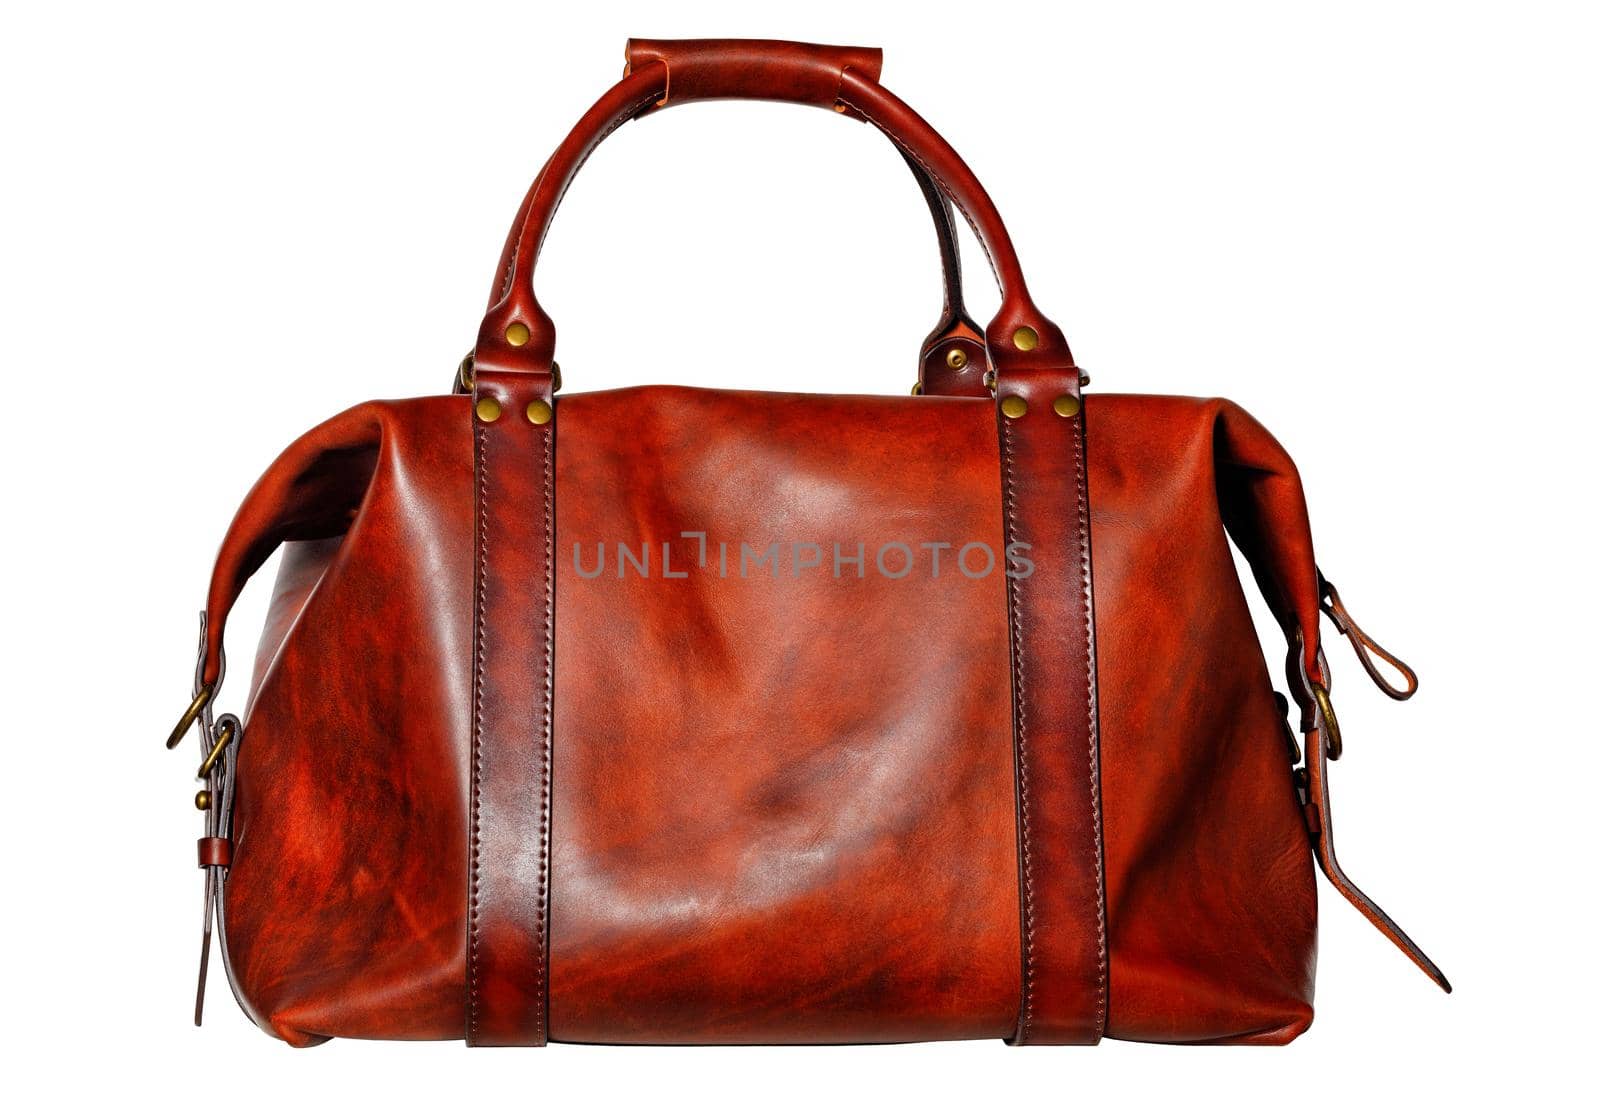 Beautiful red and brown leather bag with side fasteners, straps and brass buckles in vintage style on a white background.